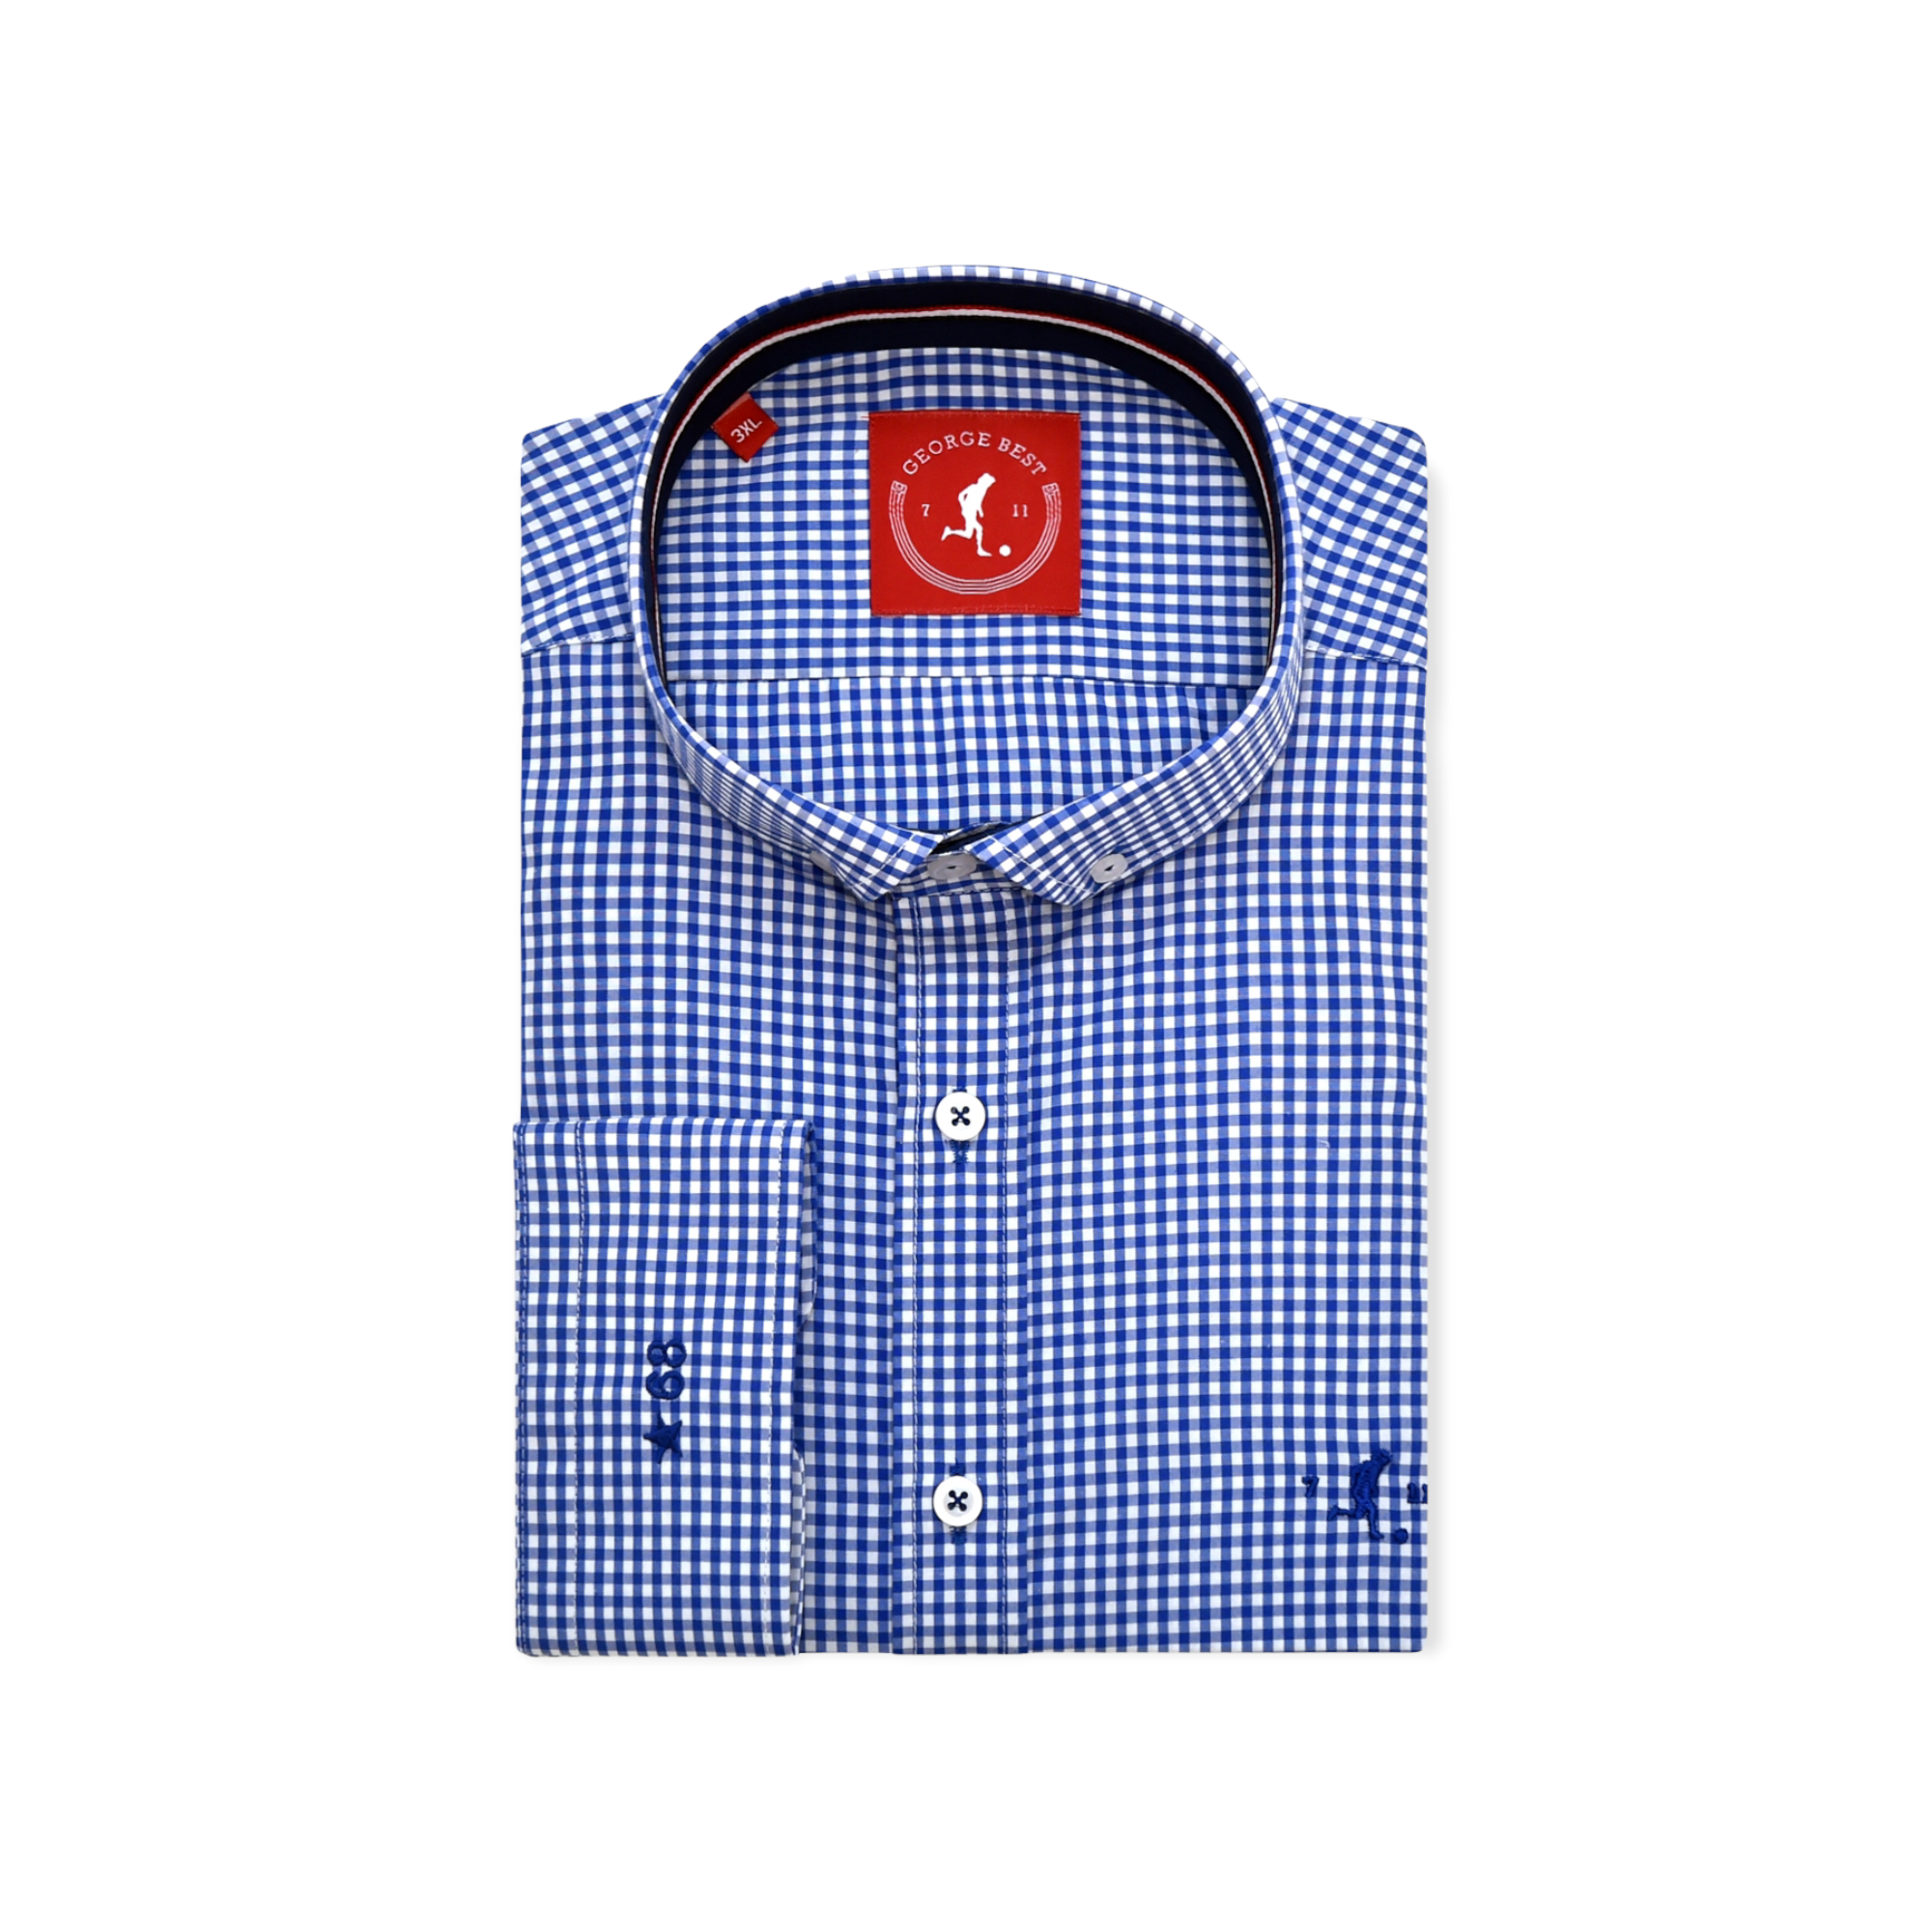 Royal Blue Gingham Check Shirt With Button Down Collar